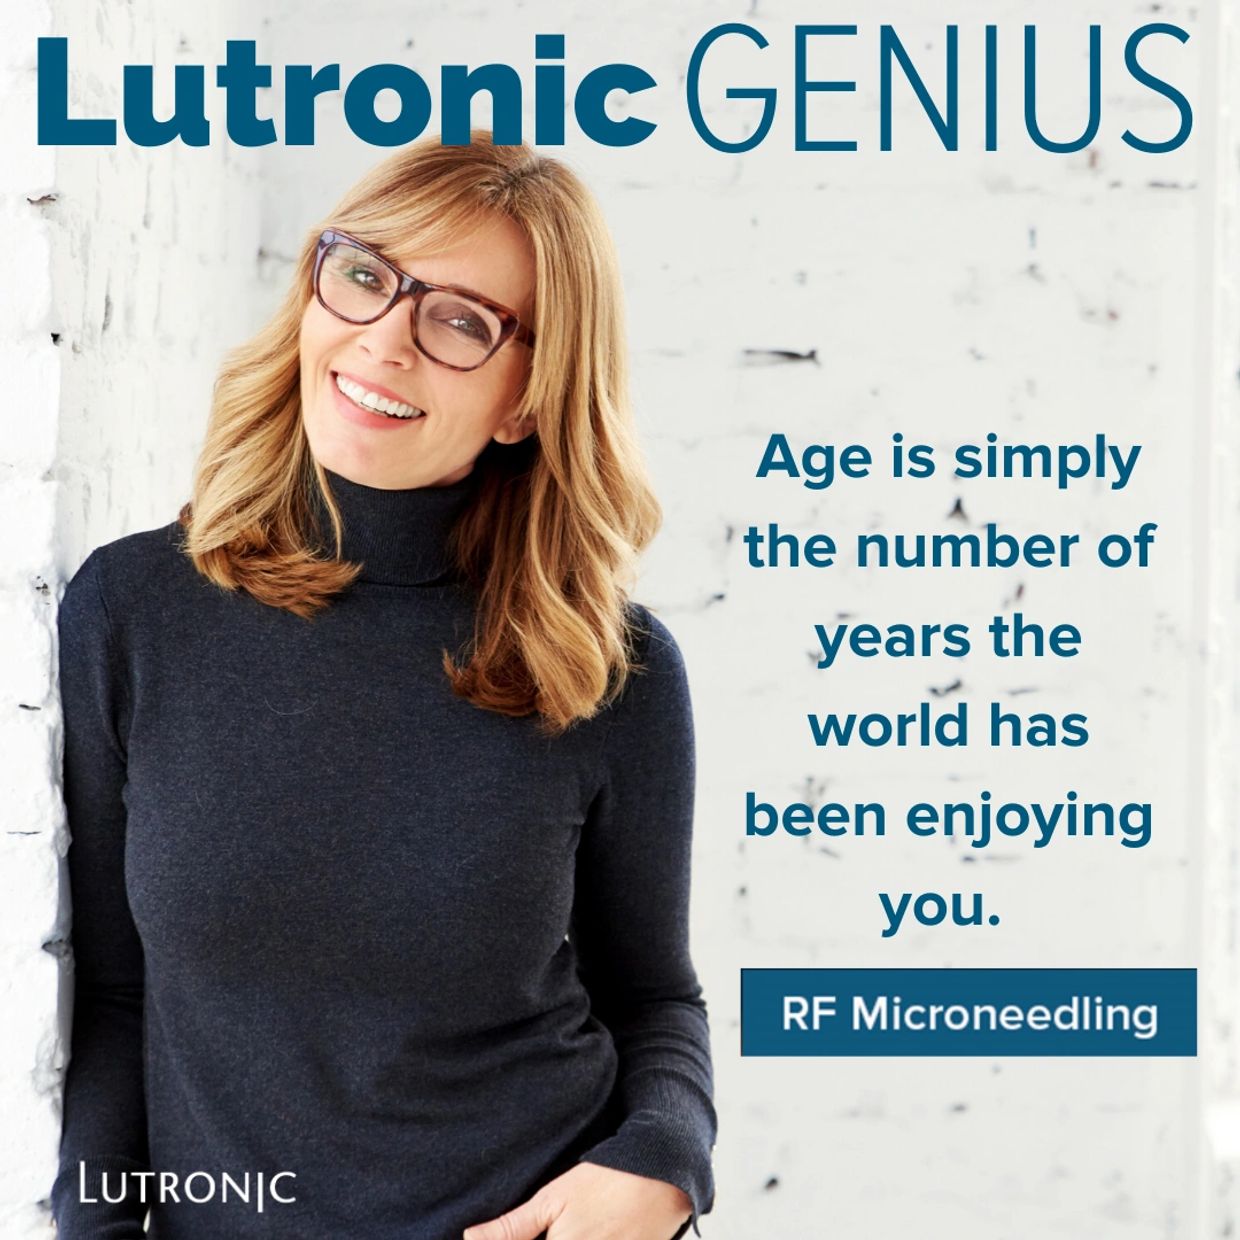 Lutronic Genius RF Microneedling: for firmer, more youthful skin!